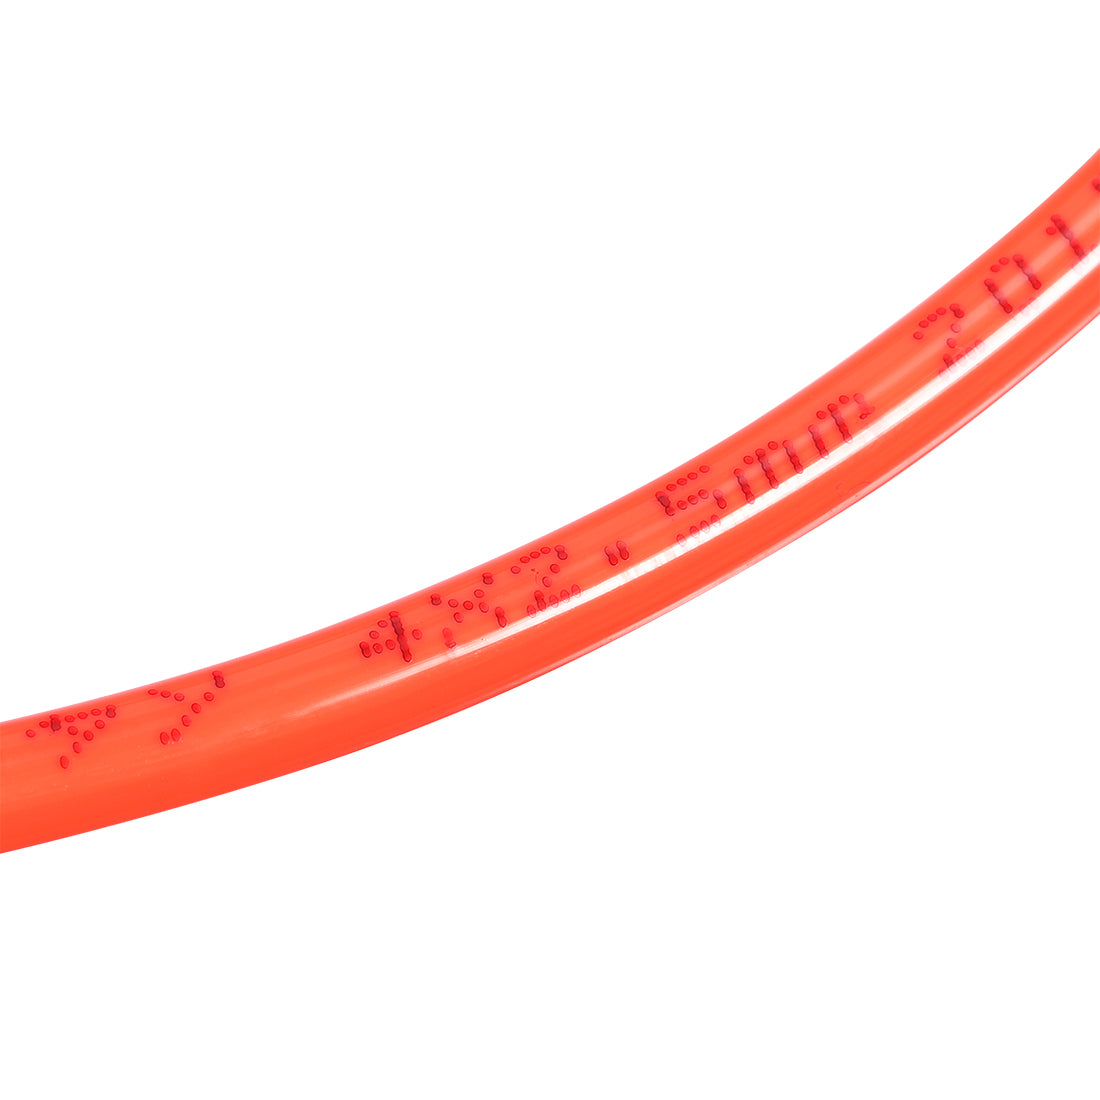 uxcell Uxcell Pneumatic Hose Tubing,4mm OD 2.5mm ID,Polyurethane PU Air Hose Pipe Tube,2 Meter 6.56ft,Red